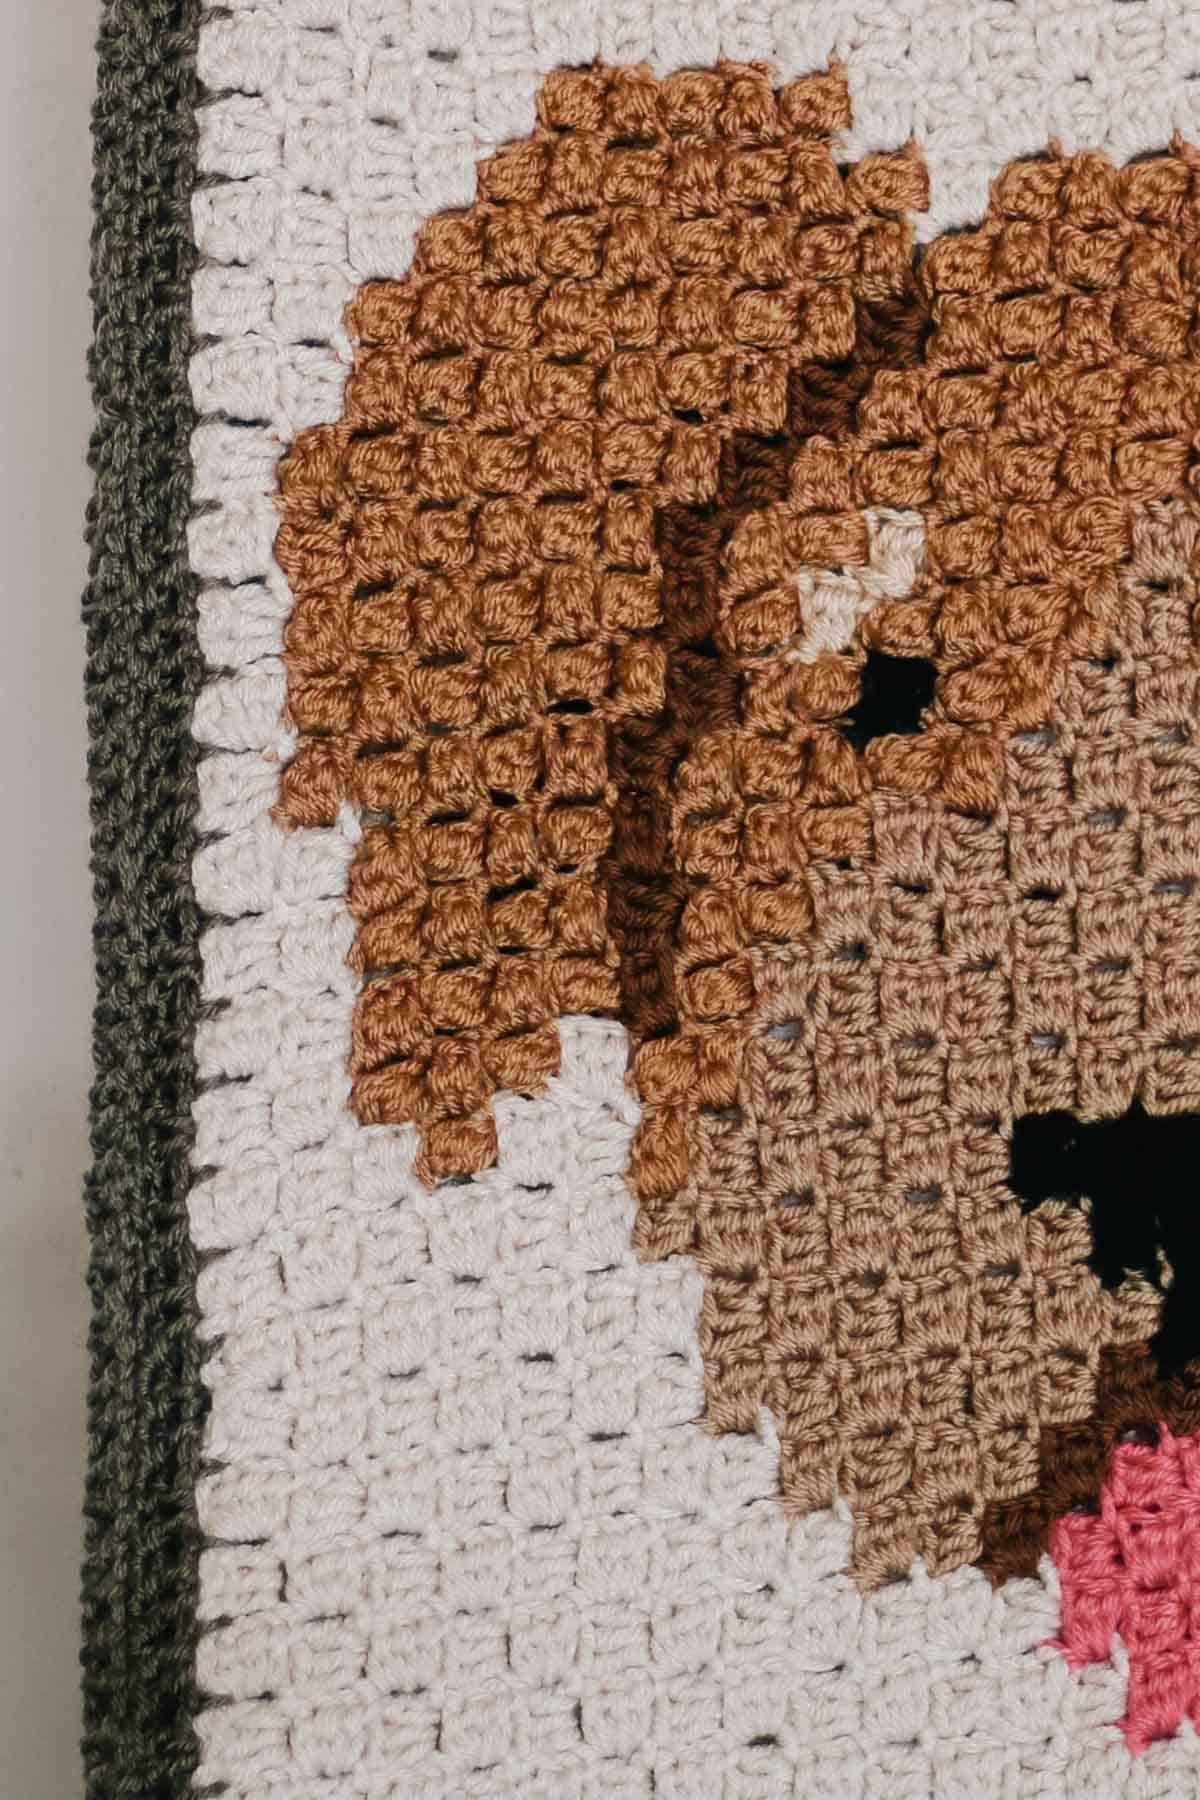 This image shows a close up of a corner to corner crochet square of a brown goldendoodle dog face.